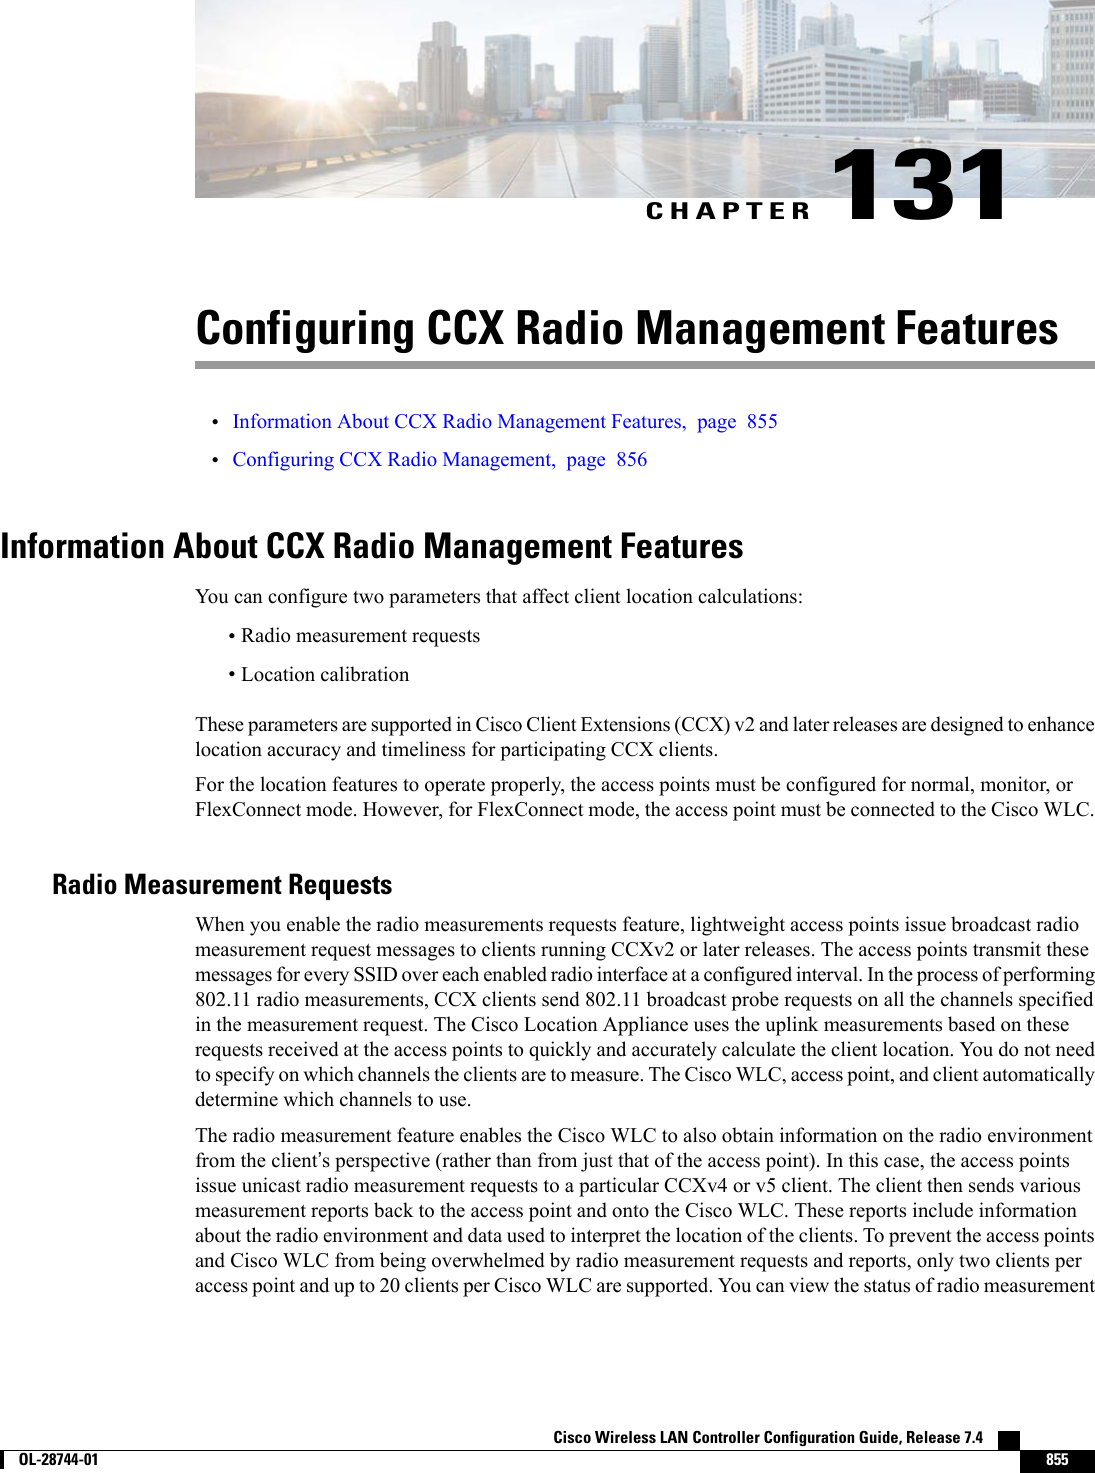 CHAPTER 131Configuring CCX Radio Management Features•Information About CCX Radio Management Features, page 855•Configuring CCX Radio Management, page 856Information About CCX Radio Management FeaturesYou can configure two parameters that affect client location calculations:•Radio measurement requests•Location calibrationThese parameters are supported in Cisco Client Extensions (CCX) v2 and later releases are designed to enhancelocation accuracy and timeliness for participating CCX clients.For the location features to operate properly, the access points must be configured for normal, monitor, orFlexConnect mode. However, for FlexConnect mode, the access point must be connected to the Cisco WLC.Radio Measurement RequestsWhen you enable the radio measurements requests feature, lightweight access points issue broadcast radiomeasurement request messages to clients running CCXv2 or later releases. The access points transmit thesemessages for every SSID over each enabled radio interface at a configured interval. In the process of performing802.11 radio measurements, CCX clients send 802.11 broadcast probe requests on all the channels specifiedin the measurement request. The Cisco Location Appliance uses the uplink measurements based on theserequests received at the access points to quickly and accurately calculate the client location. You do not needto specify on which channels the clients are to measure. The Cisco WLC, access point, and client automaticallydetermine which channels to use.The radio measurement feature enables the Cisco WLC to also obtain information on the radio environmentfrom the client’s perspective (rather than from just that of the access point). In this case, the access pointsissue unicast radio measurement requests to a particular CCXv4 or v5 client. The client then sends variousmeasurement reports back to the access point and onto the Cisco WLC. These reports include informationabout the radio environment and data used to interpret the location of the clients. To prevent the access pointsand Cisco WLC from being overwhelmed by radio measurement requests and reports, only two clients peraccess point and up to 20 clients per Cisco WLC are supported. You can view the status of radio measurementCisco Wireless LAN Controller Configuration Guide, Release 7.4        OL-28744-01 855